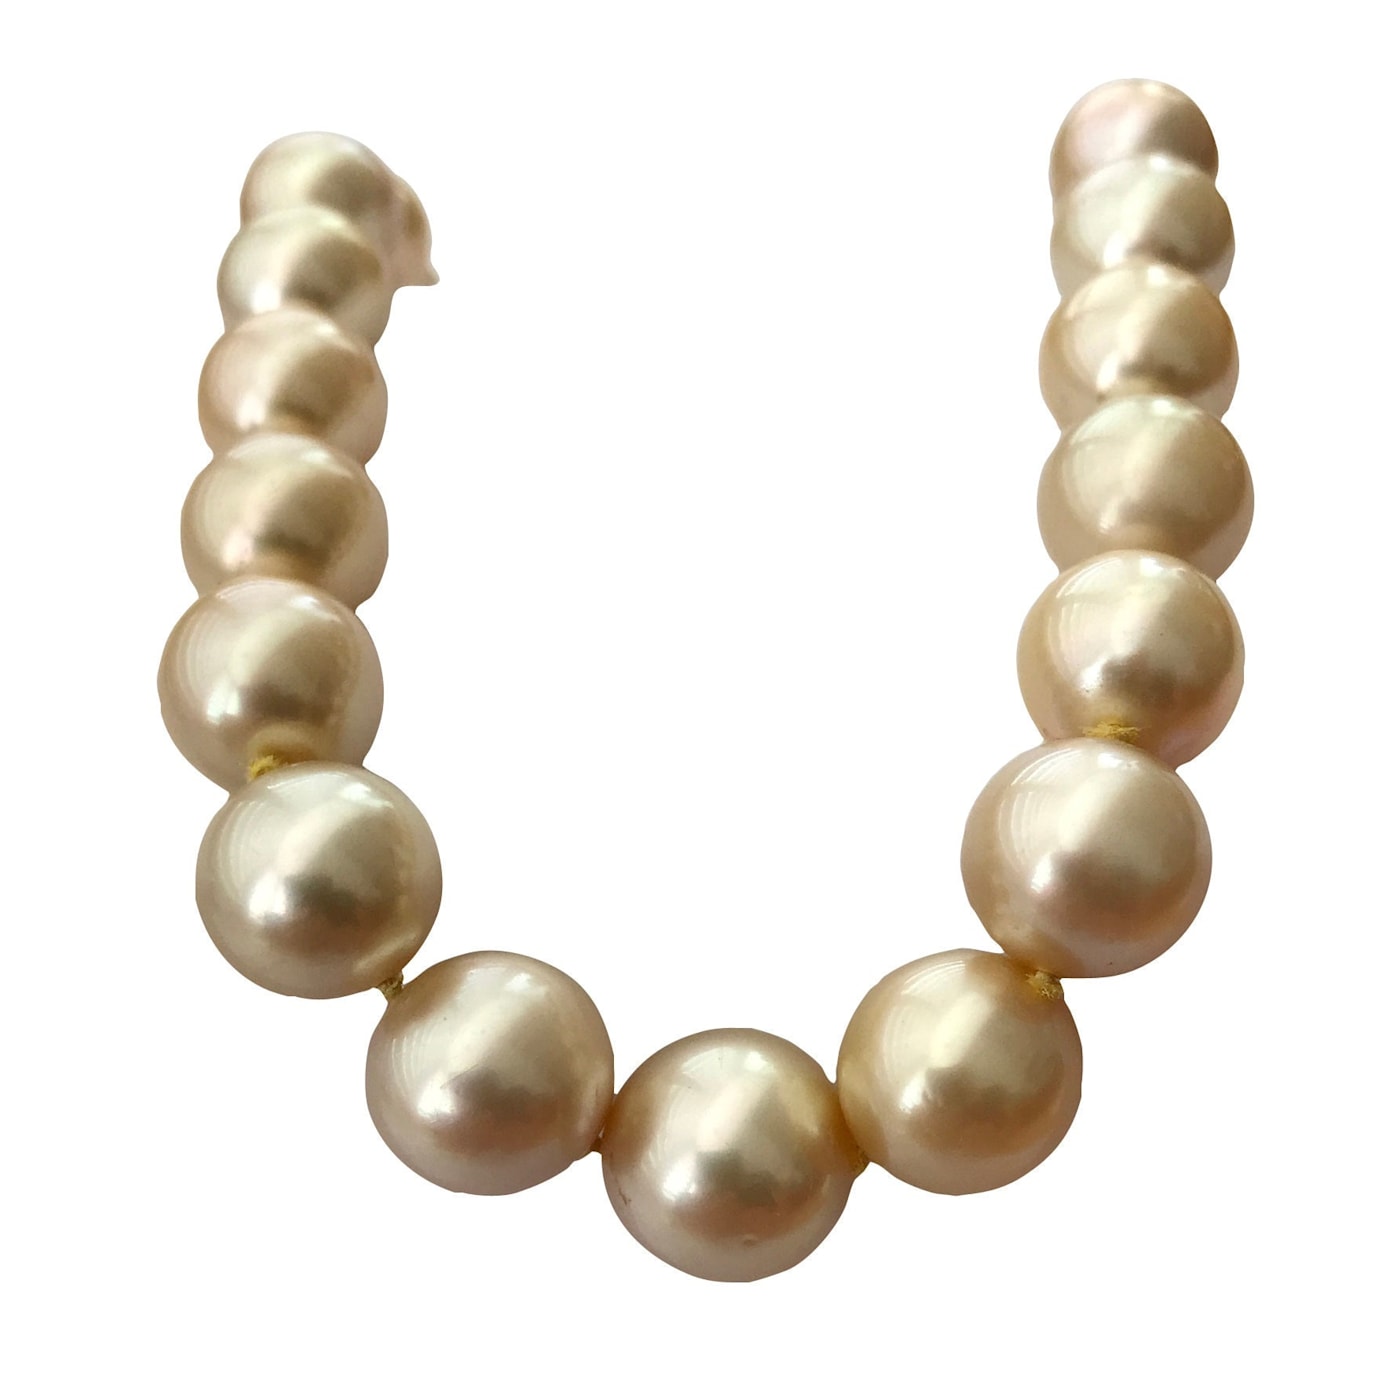 Rare Aaaa Champagne Natural Color Golden South Sea Cultured Pearl Strand with 14K Yellow Gold Clasp